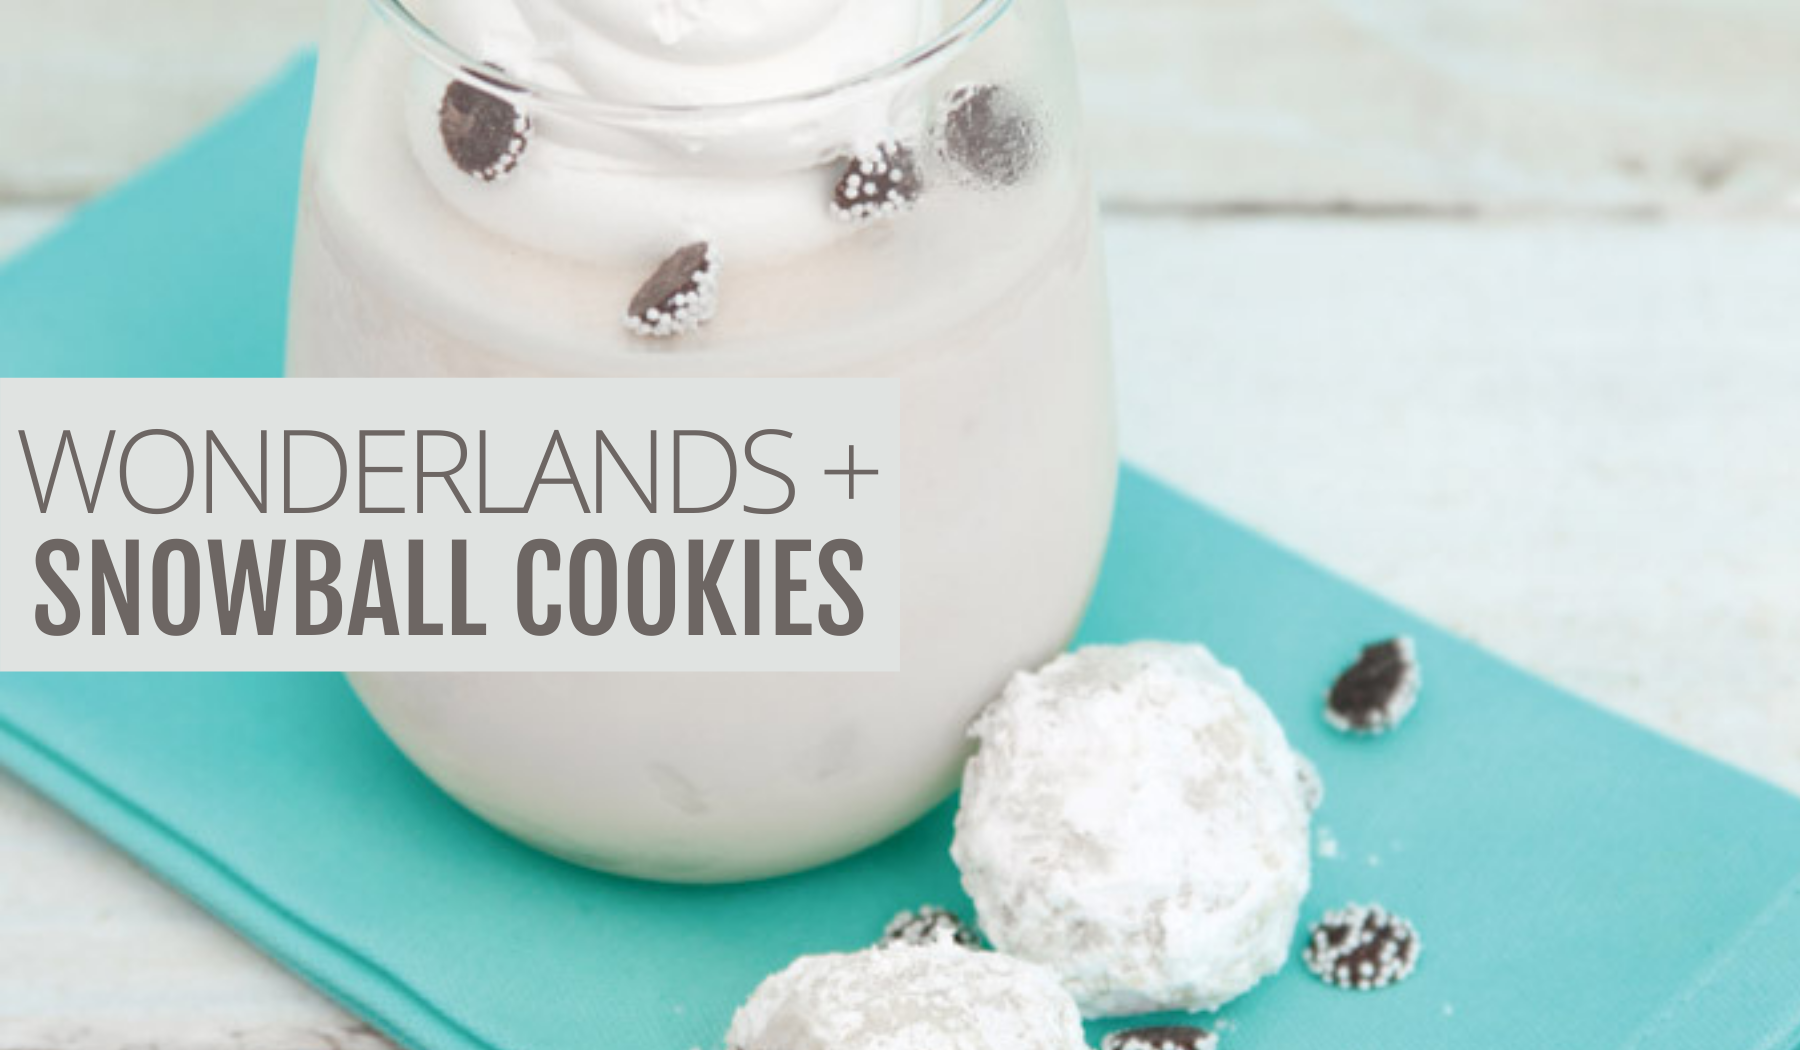 HOW TO MAKE WINTER WONDERLANDS AND SNOWBALL COOKIES